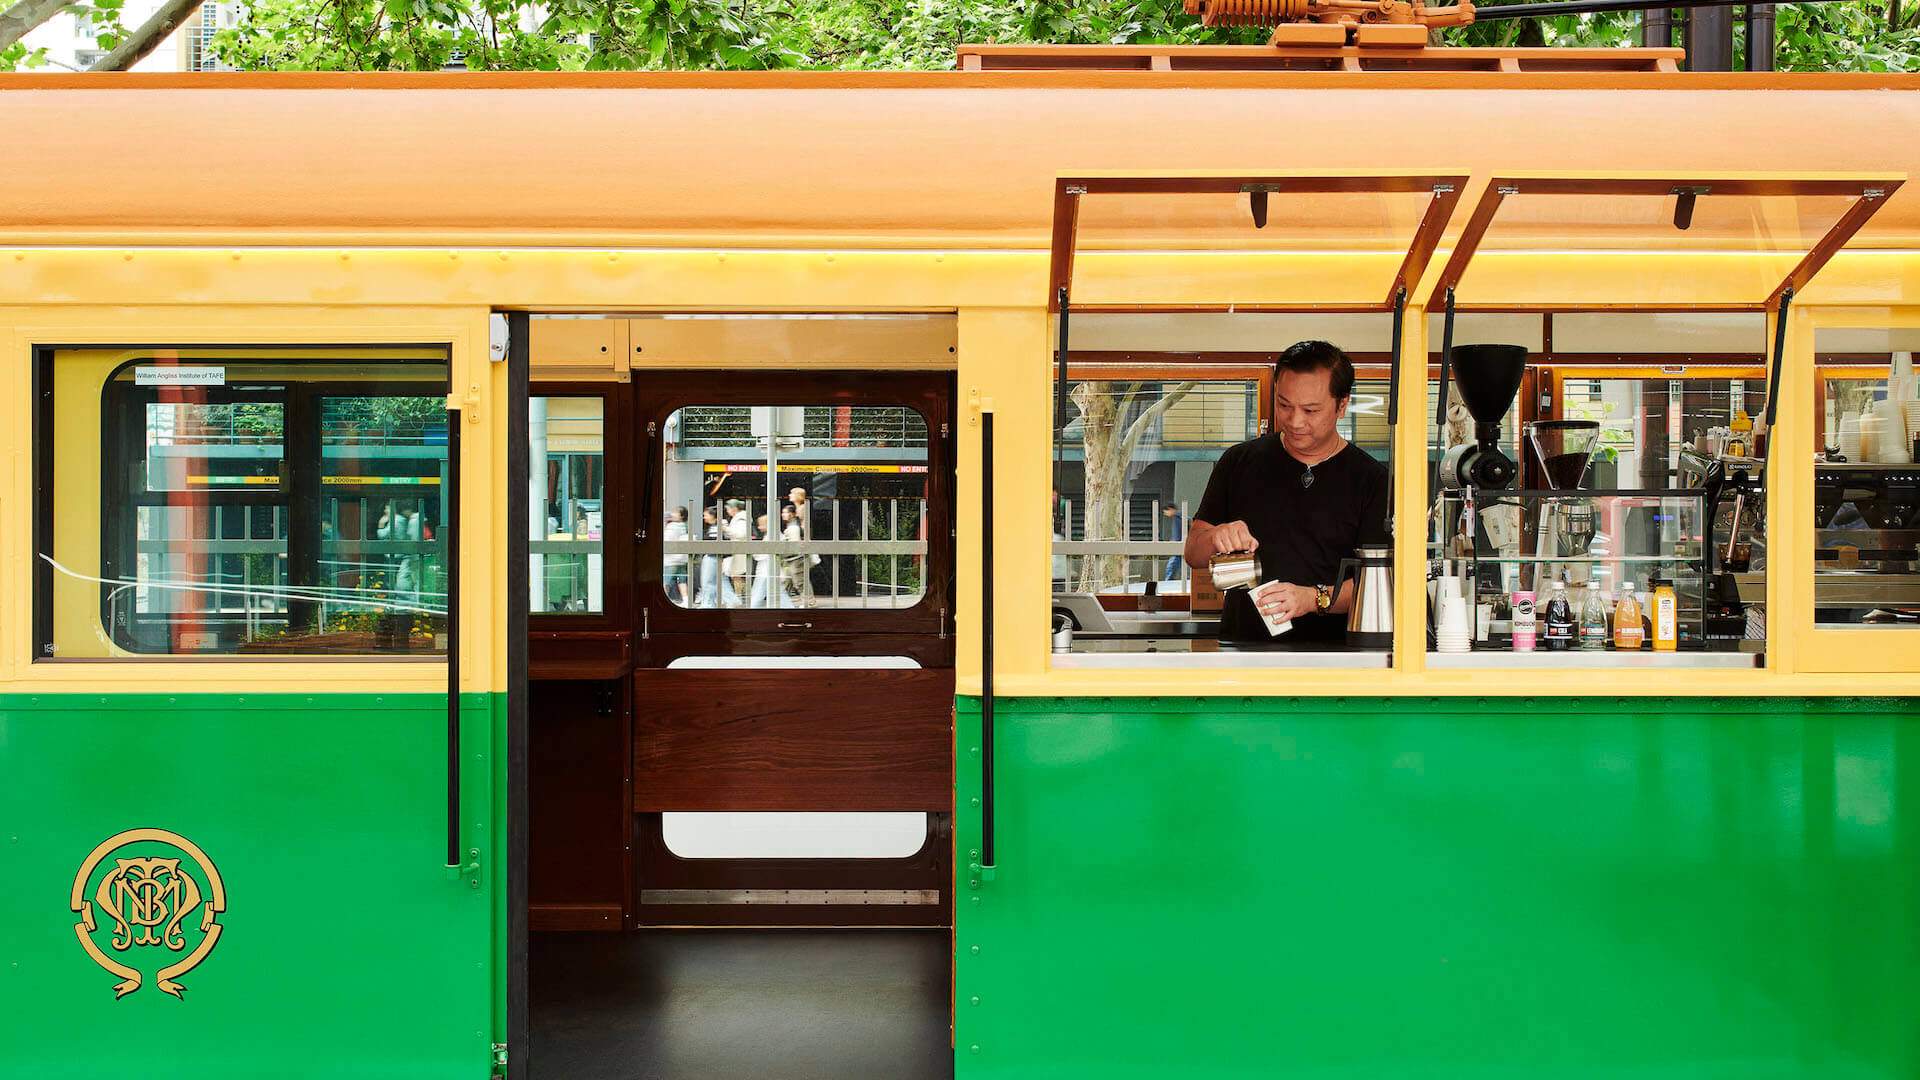 Now Open: William Angliss Students Are Slinging $3.60 Coffees From a Vintage Tram in the CBD